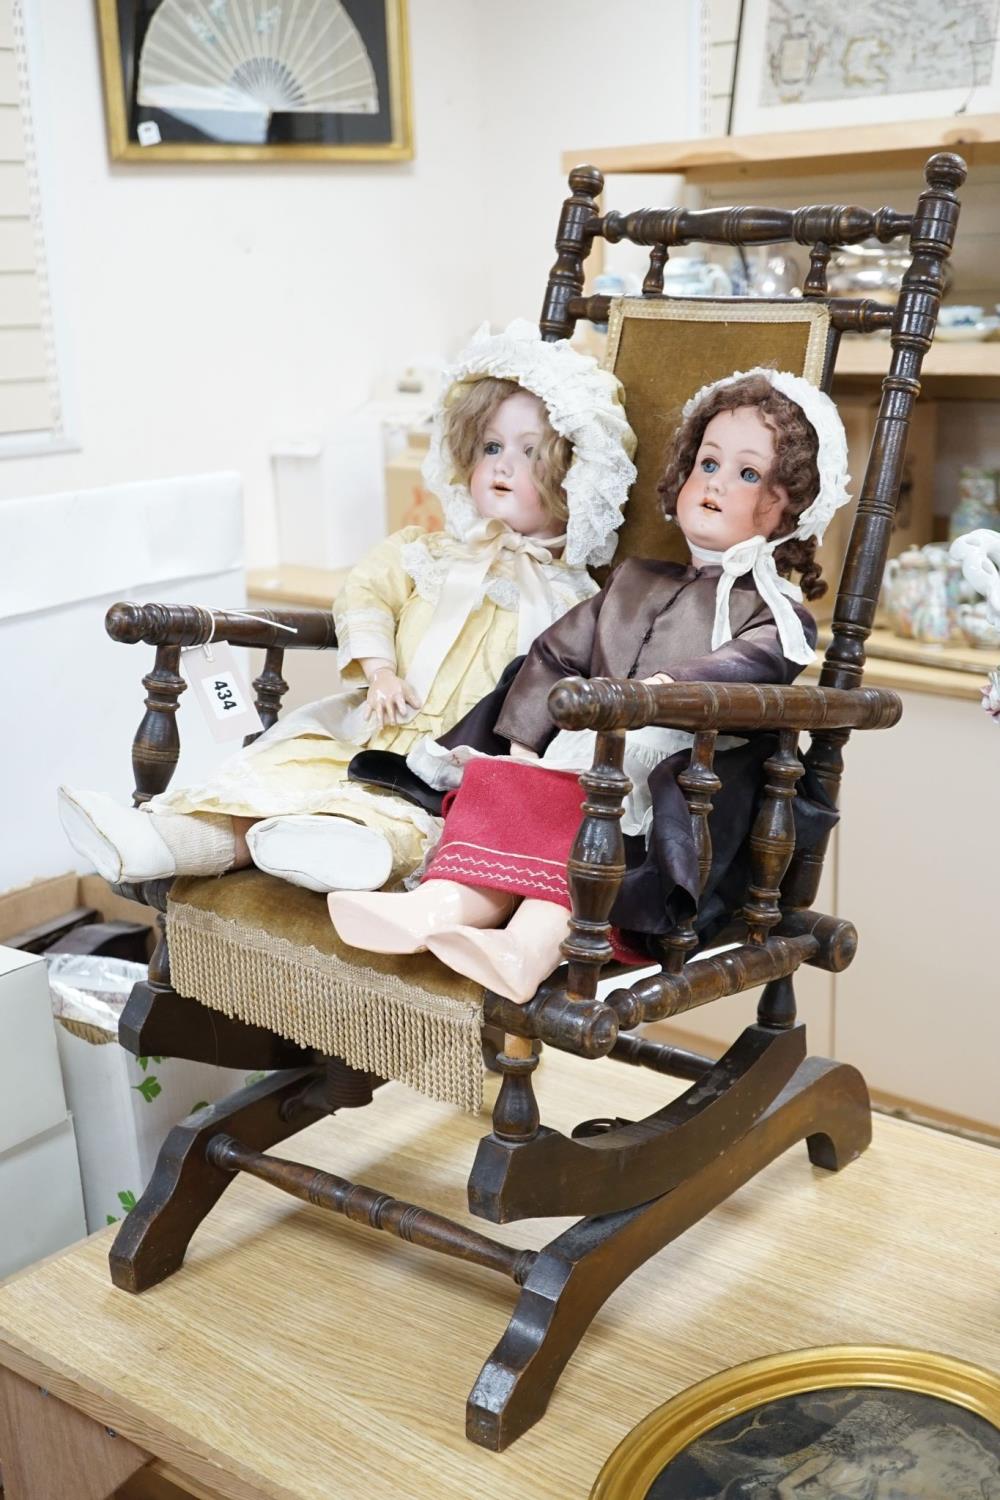 A Heubach, Koppelsdorf 250 bisque doll and an Armand Marseille 390 bisque doll, seated in turned - Image 2 of 5